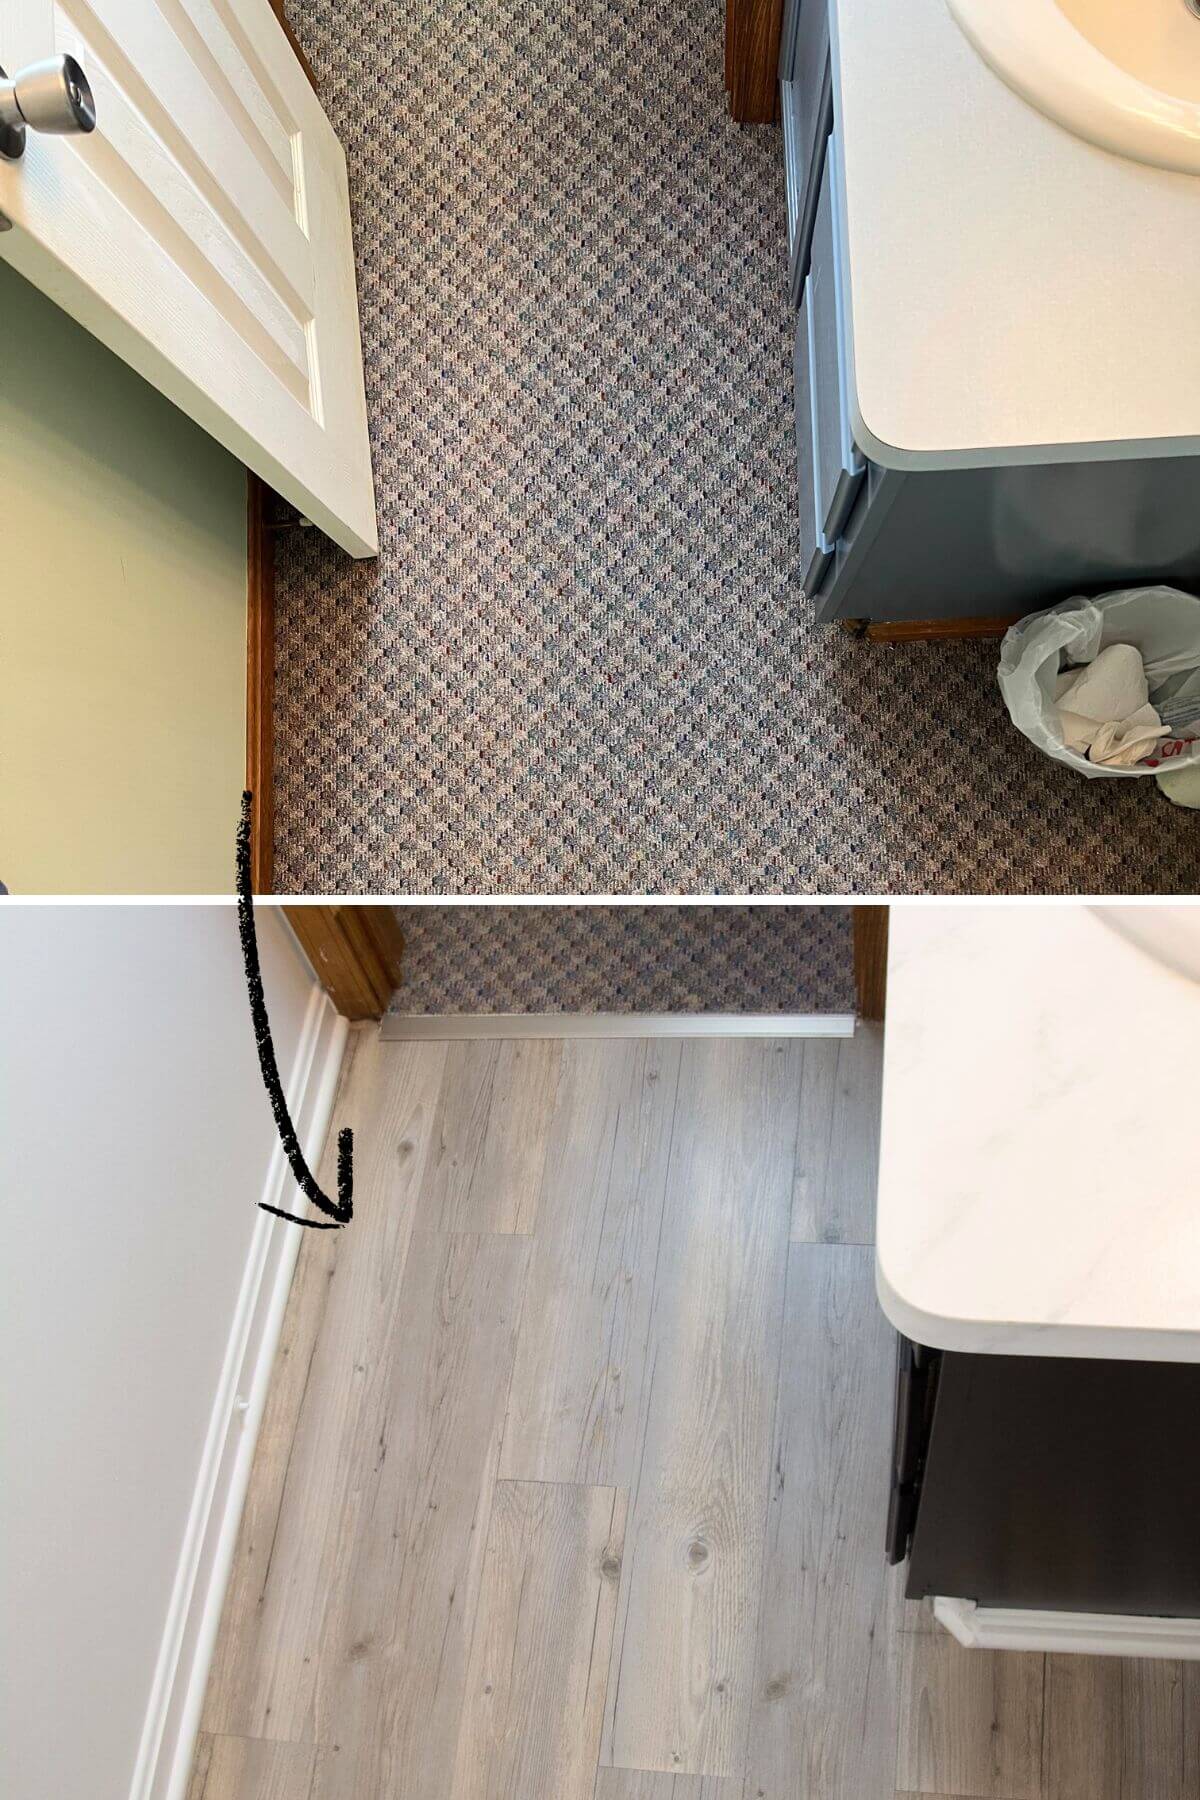 two images of the same bathroom floor, one with carpet and one with faux wood plank flooring.